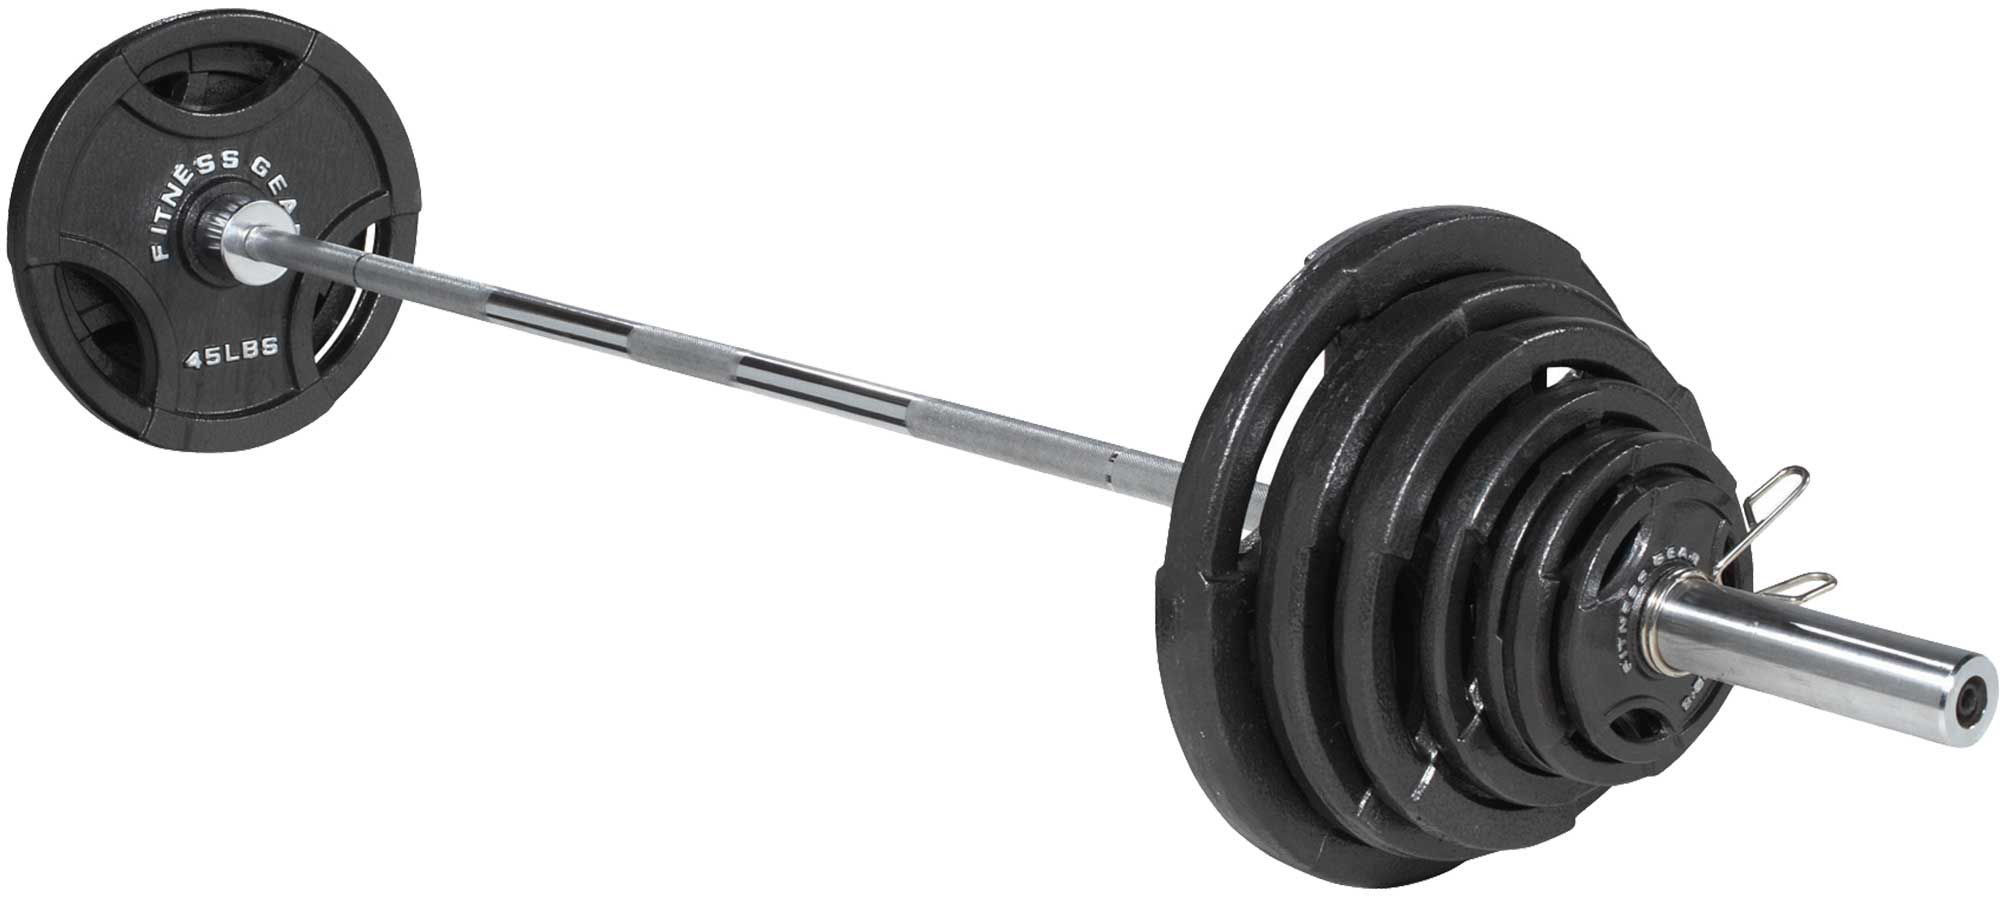 300lbs Olympic Weight Sets $299 - Limited Stock - YMMV